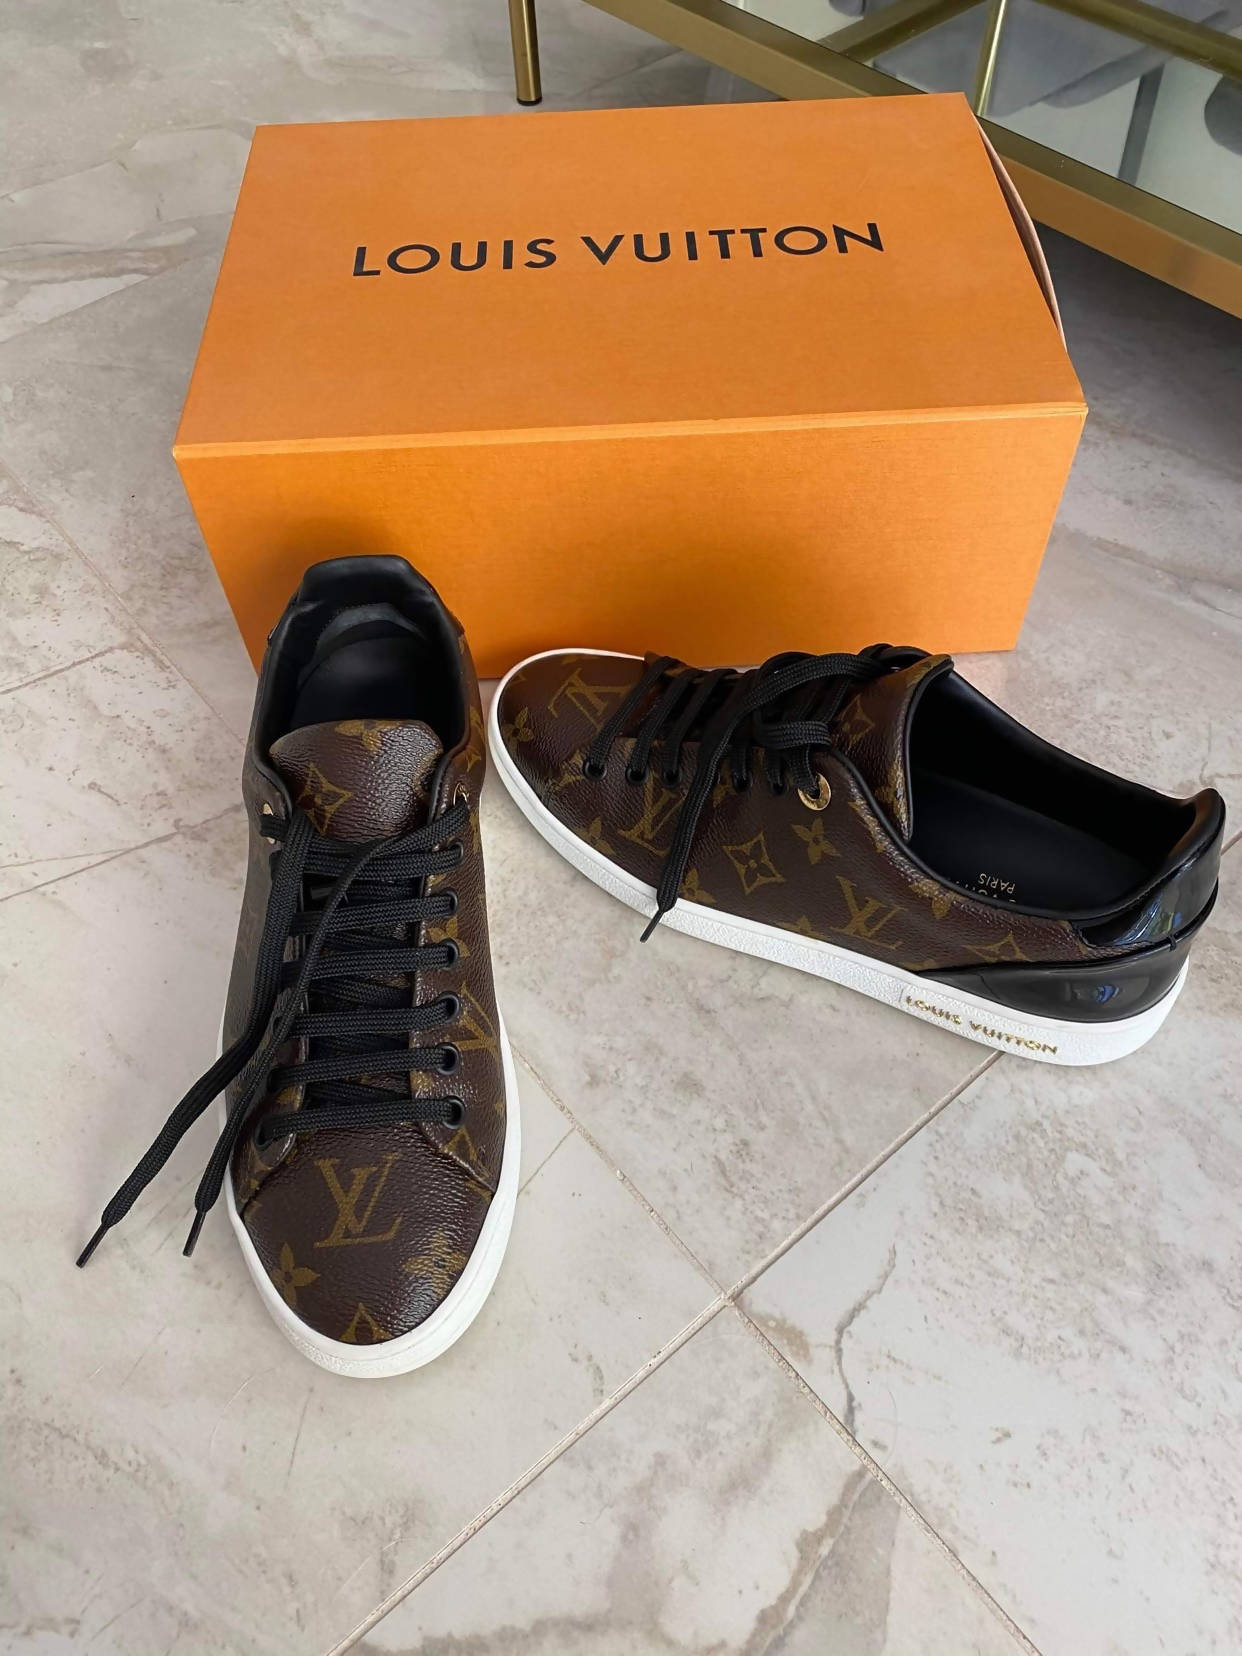 LV FRONTROW Sneakers - Size 37